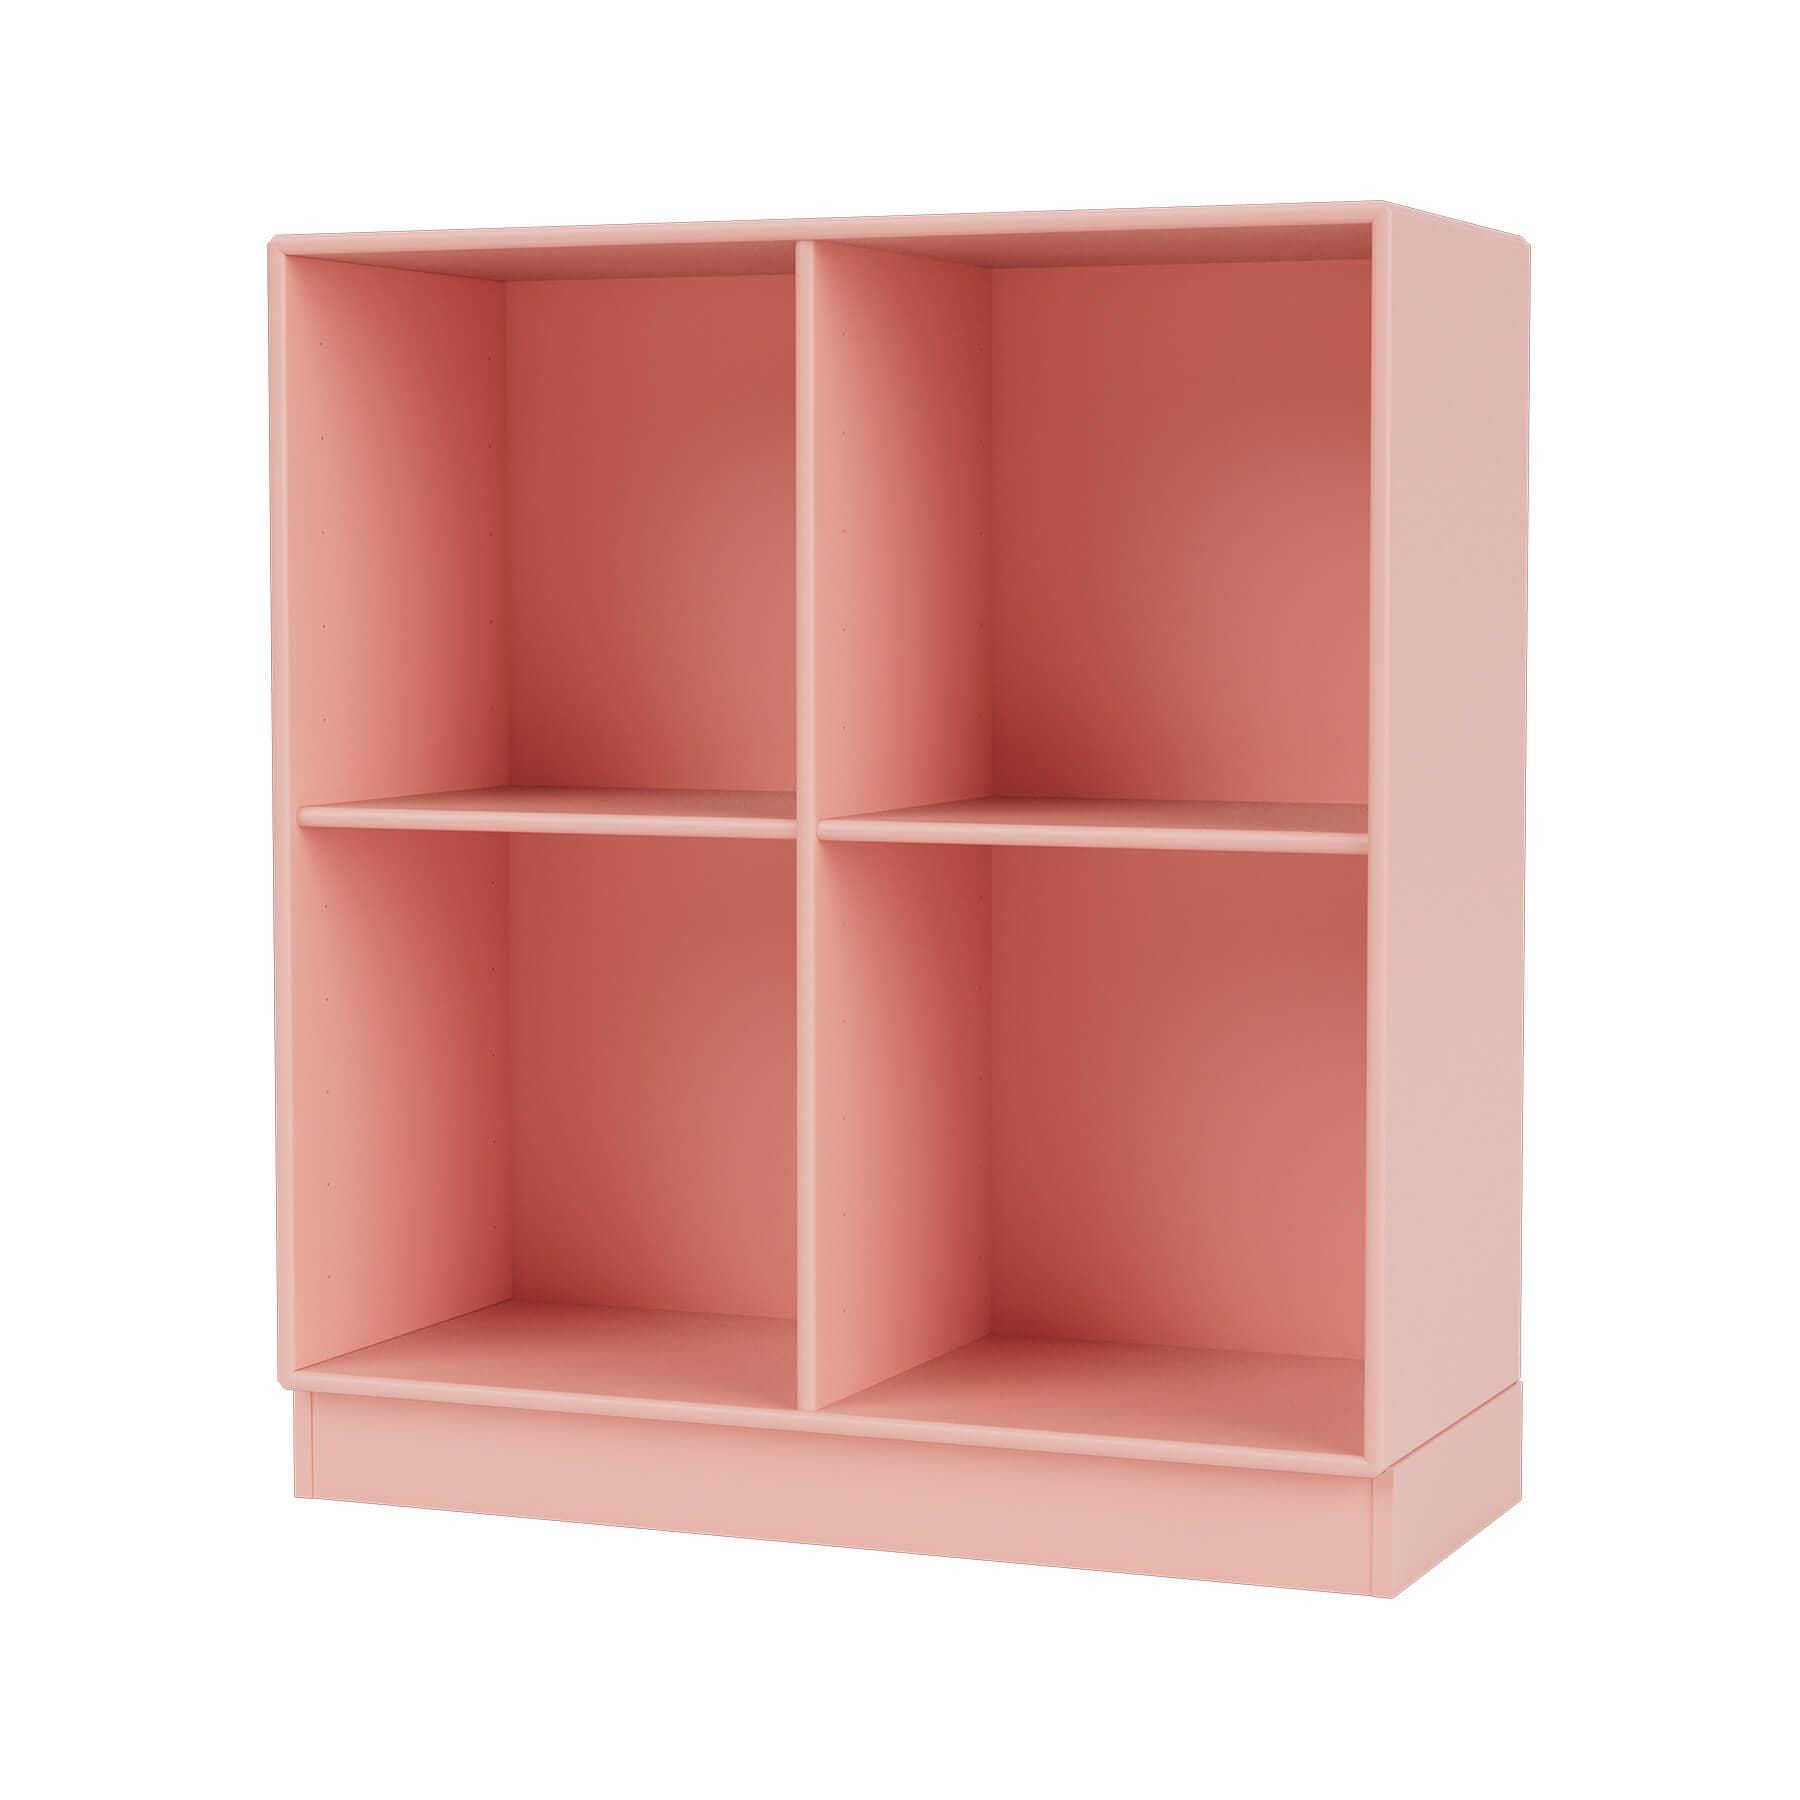 Montana Show Bookcase Ruby Plinth Pink Designer Furniture From Holloways Of Ludlow